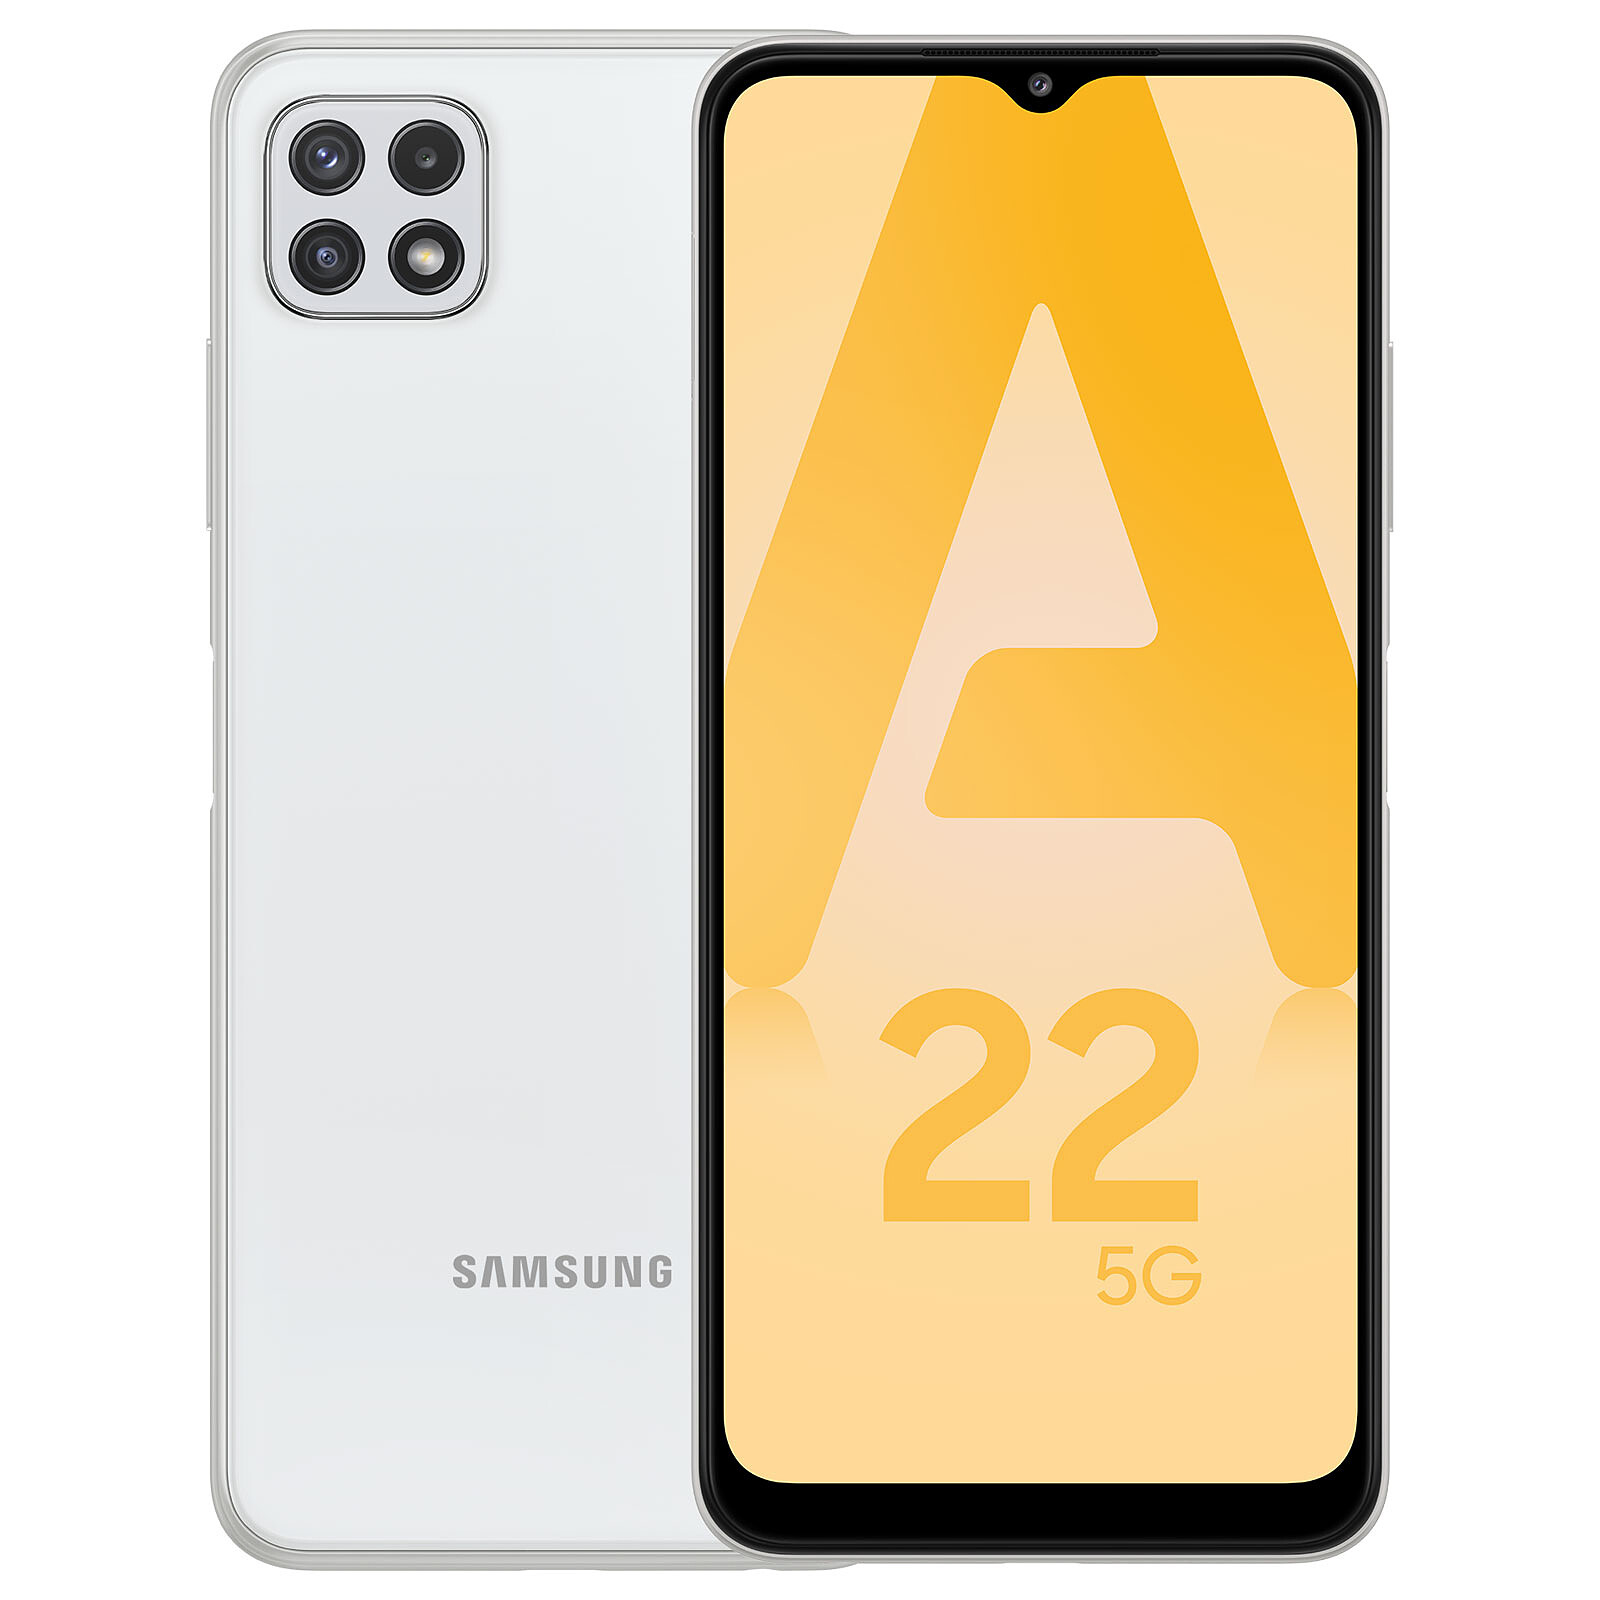 Samsung Galaxy A22 5G White - Mobile phone & smartphone - LDLC 